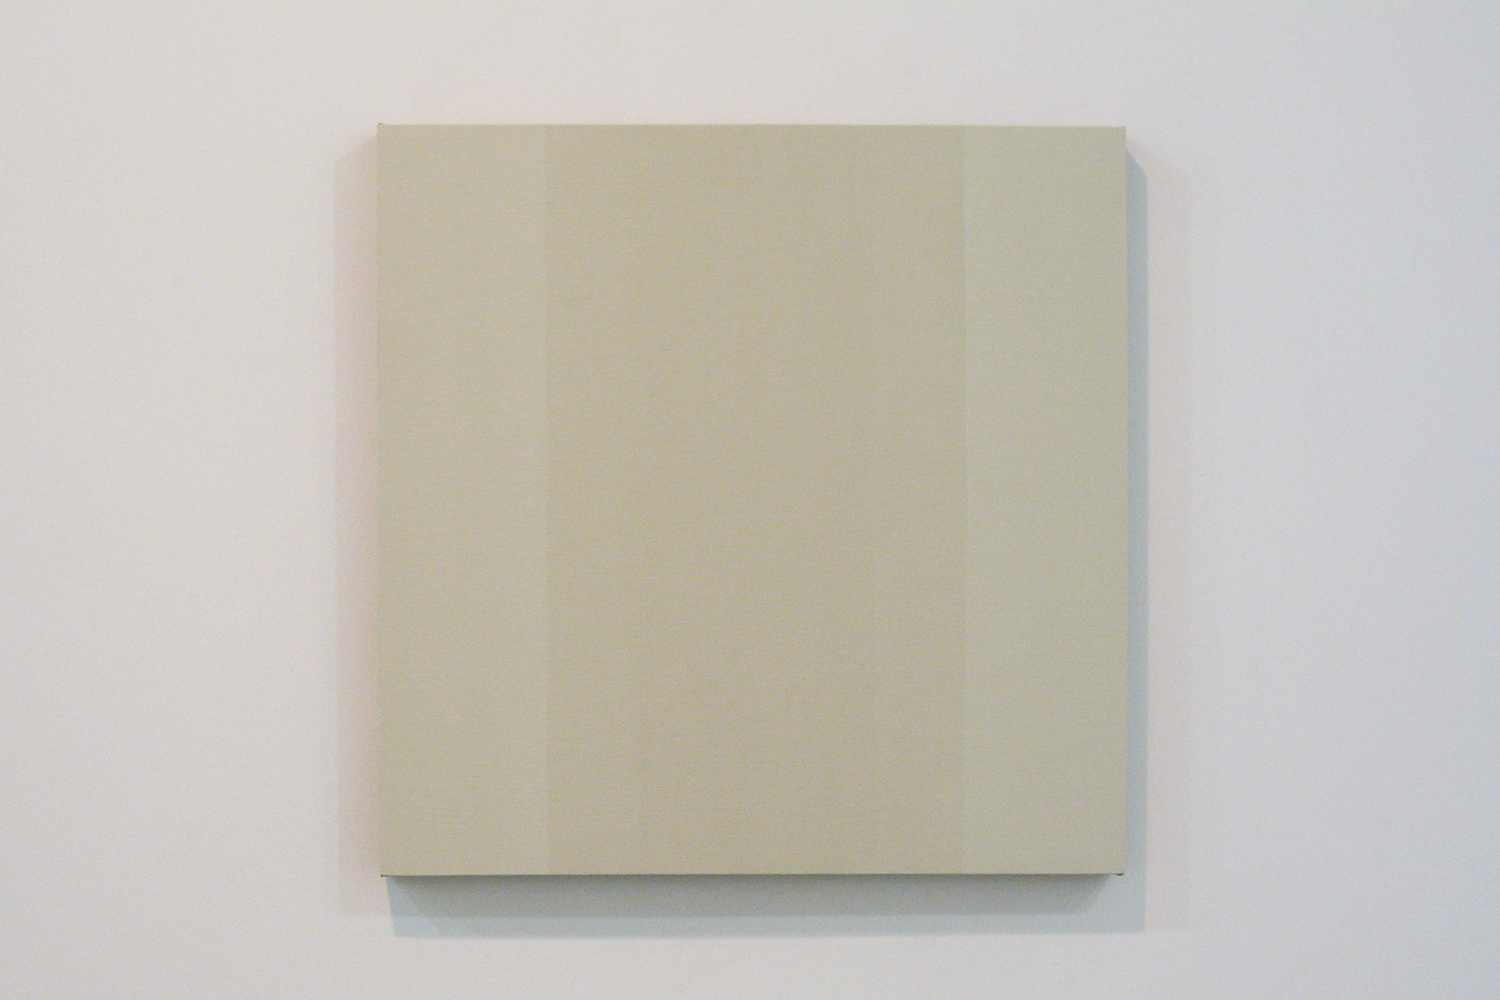 TS0910｜Gesso on linen on panel,｜50 x 50 cm,｜2009